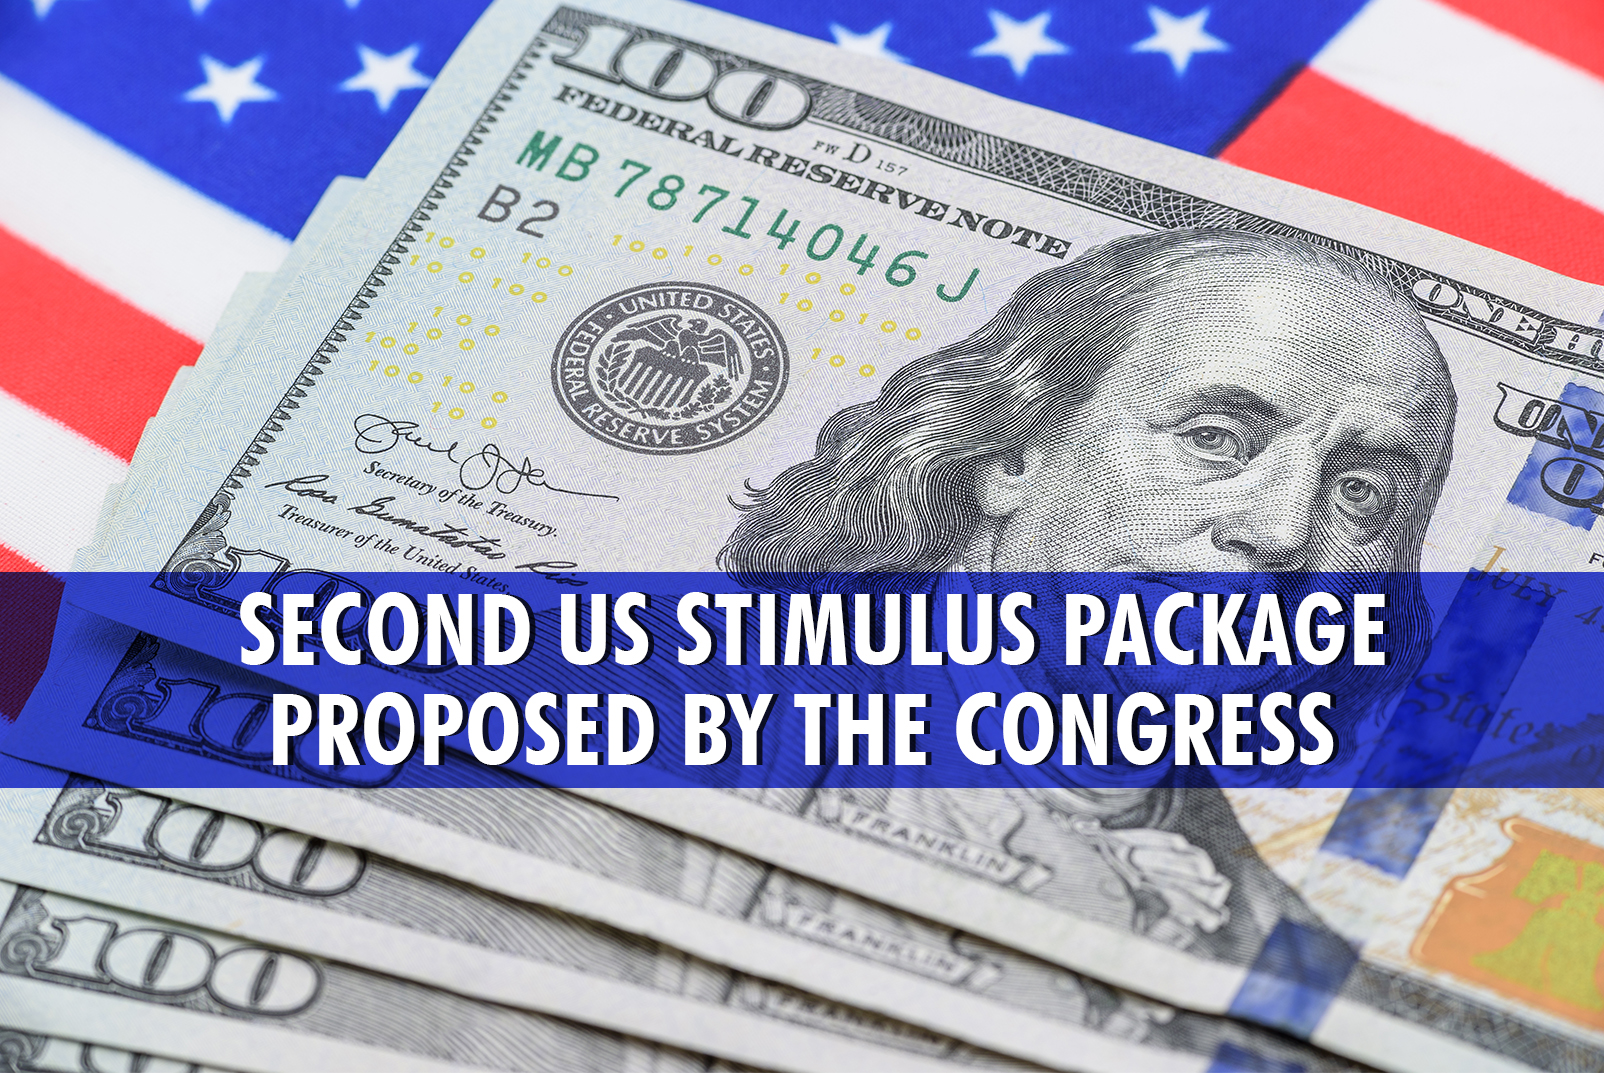 Second US stimulus package proposed by the Congress Ausprime Cyprus